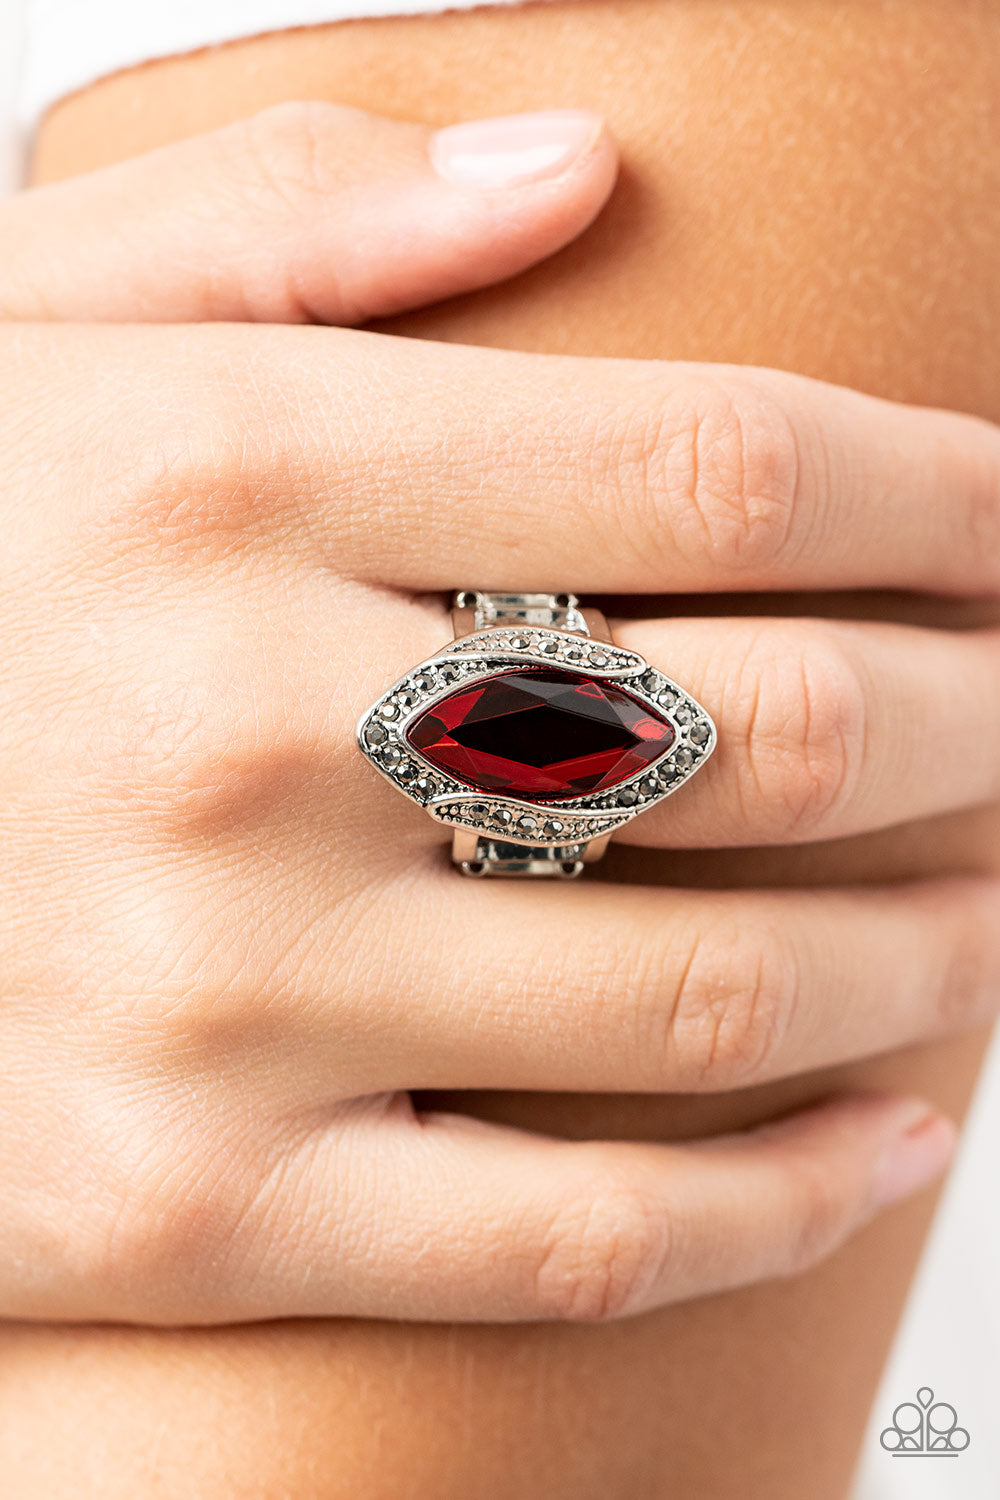 Let Me Take a REIGN Check - Red Paparazzi Ring